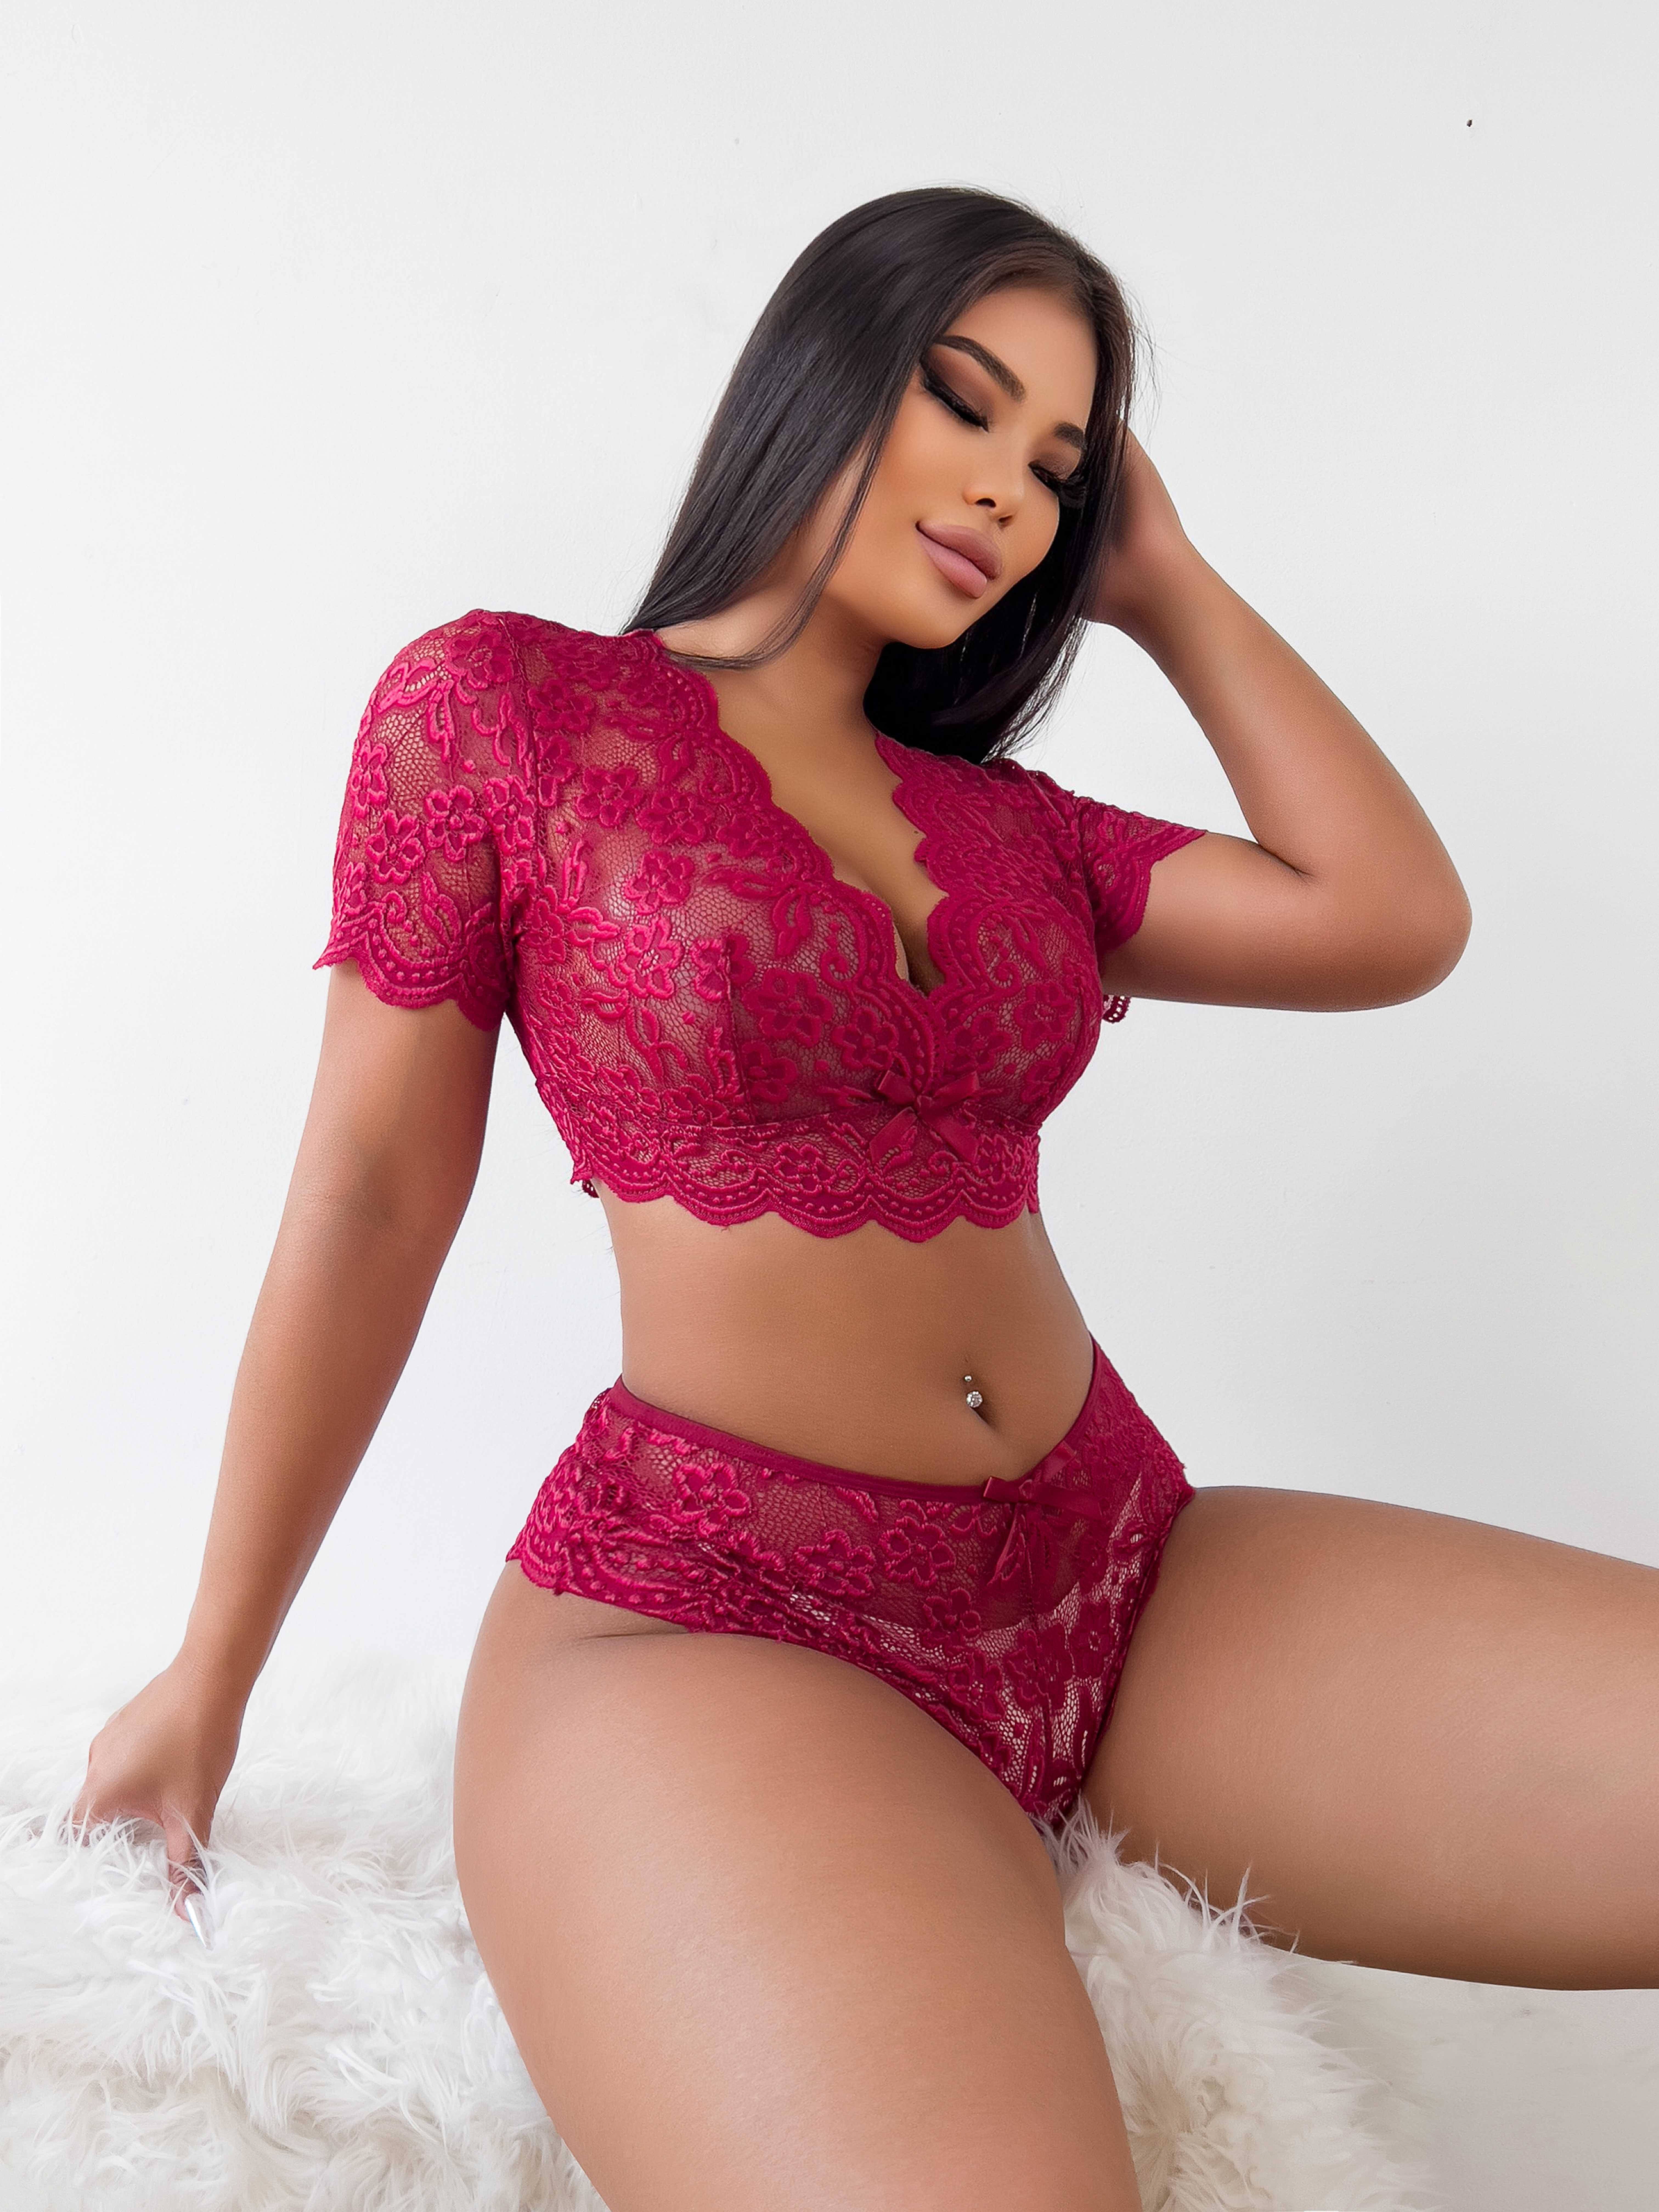 Burgundy lingerie set with lace shorty